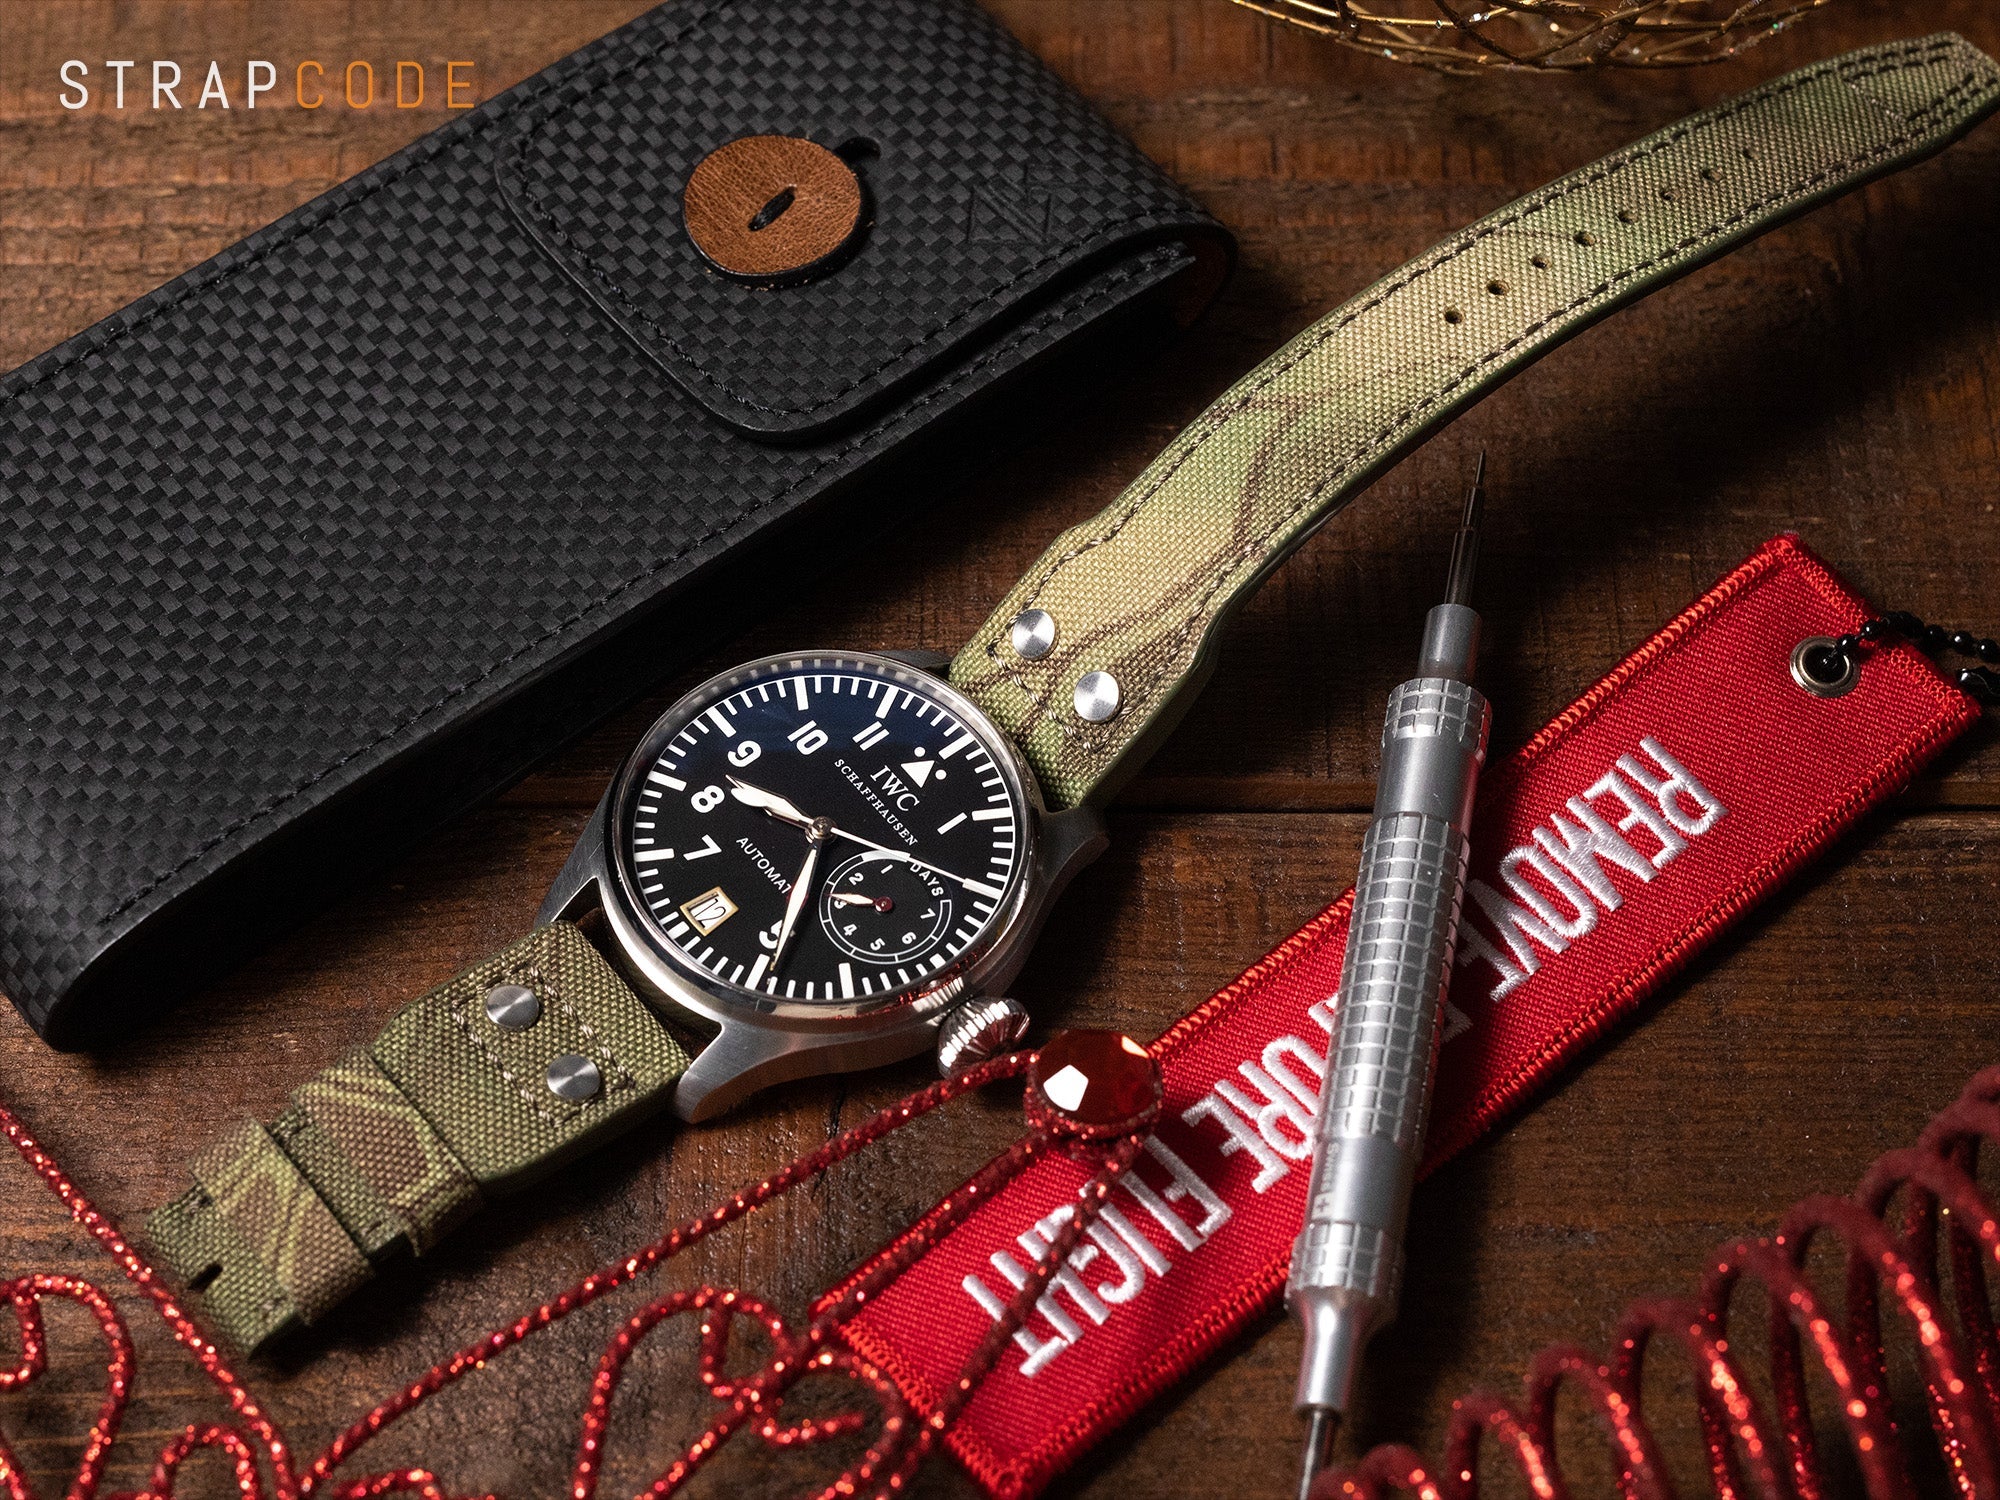 The custom-fit Ninja Turtle Camo Nylon Replacement Strap designed to fit the IWC Big Pilot clasp by Strapcode